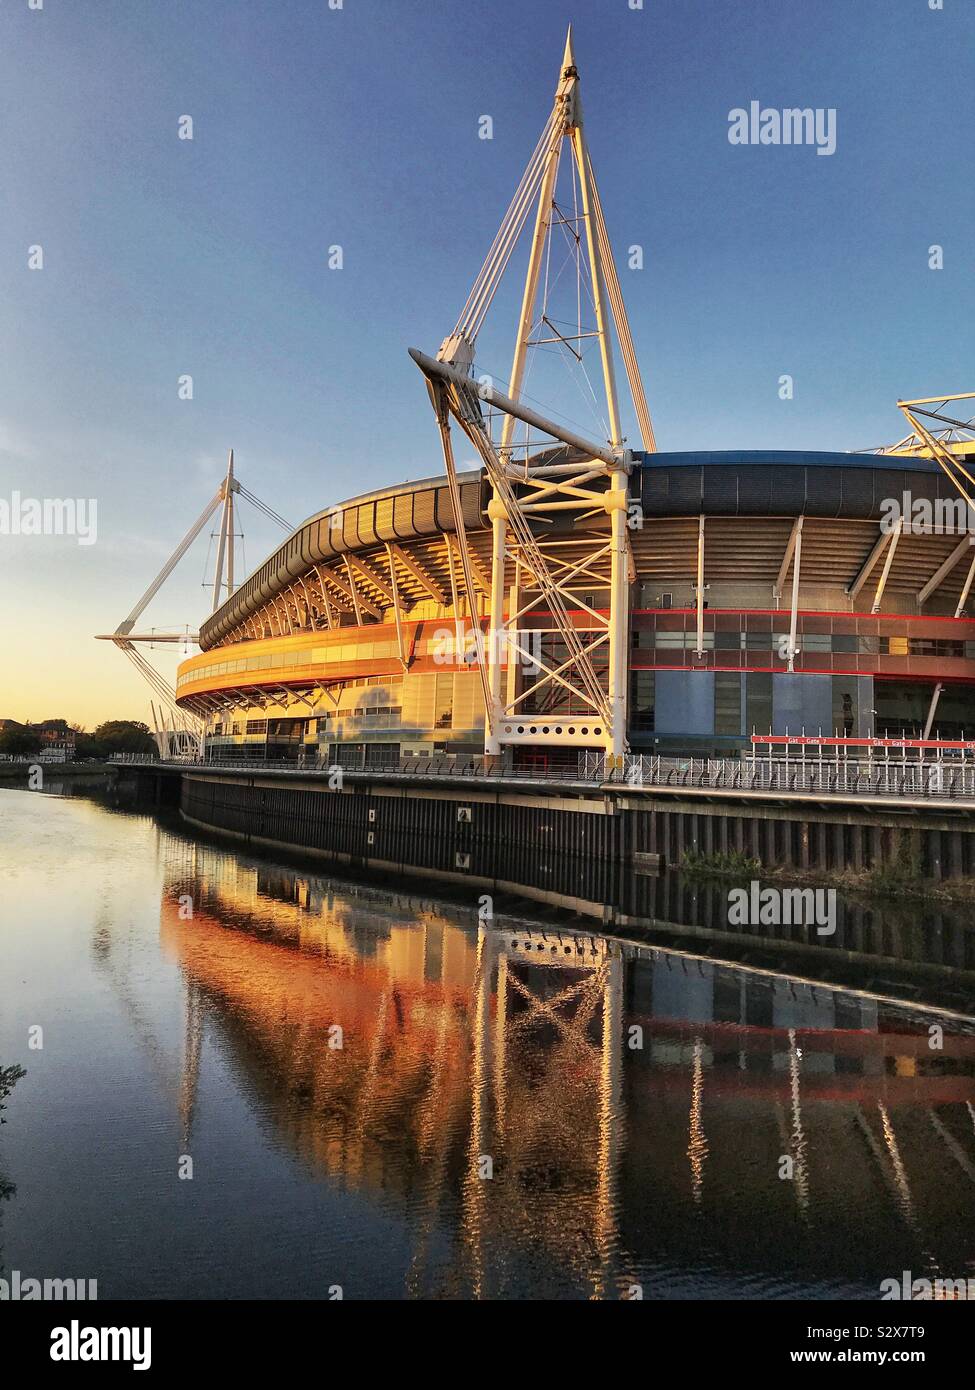 The Principality Stadium in Cardiff at sunset. It is located in the city centre on the banks of the River Taff Stock Photo